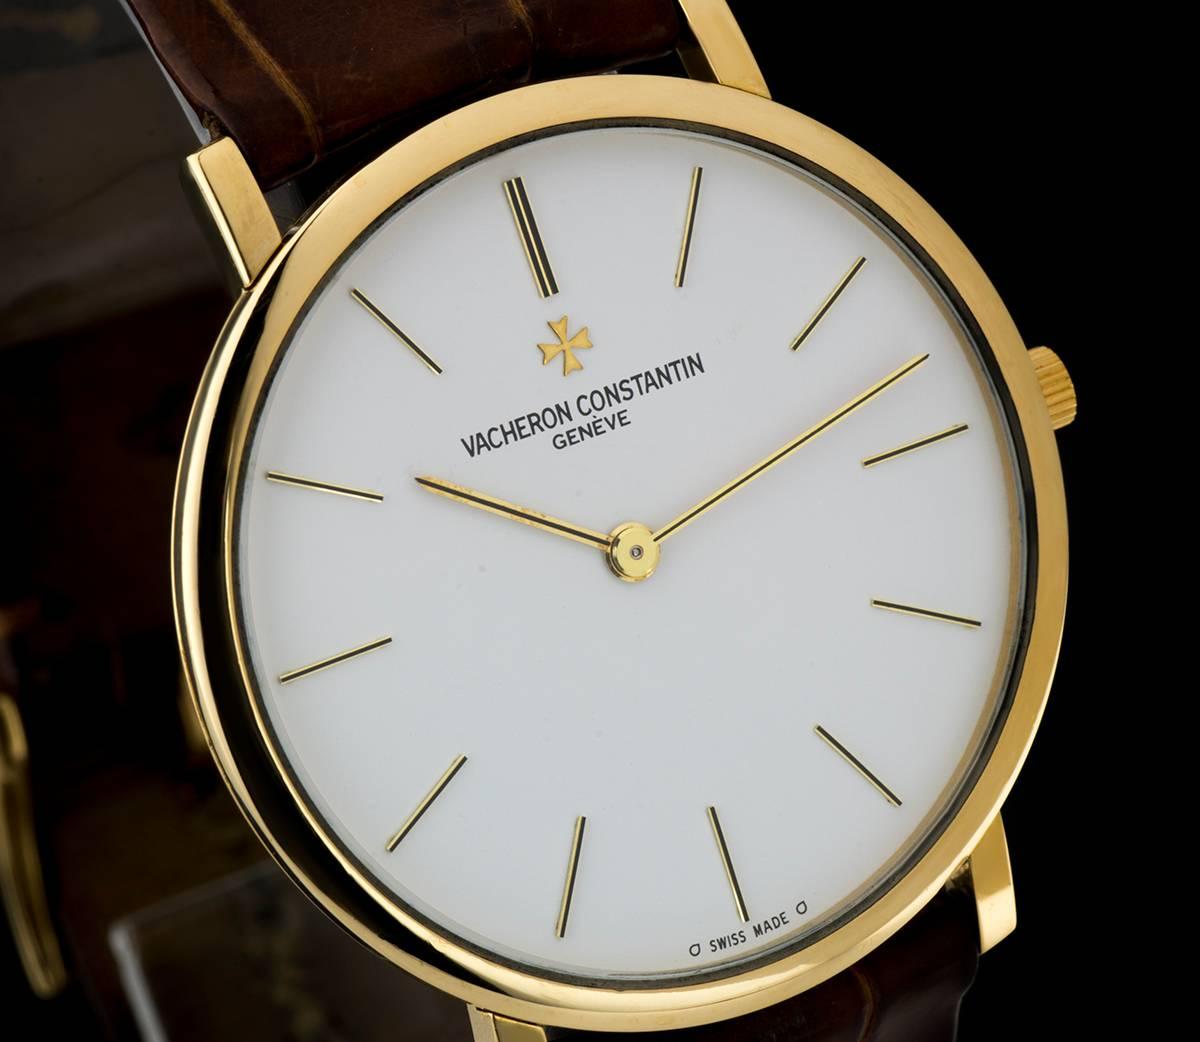 An 18k Yellow Gold Ultra Thin Gents Wristwatch, white dial with applied hour markers, a fixed 18k yellow gold bezel, an original brown leather strap with an original 18k yellow gold pin buckle, mineral glass, manual wind movement, in excellent